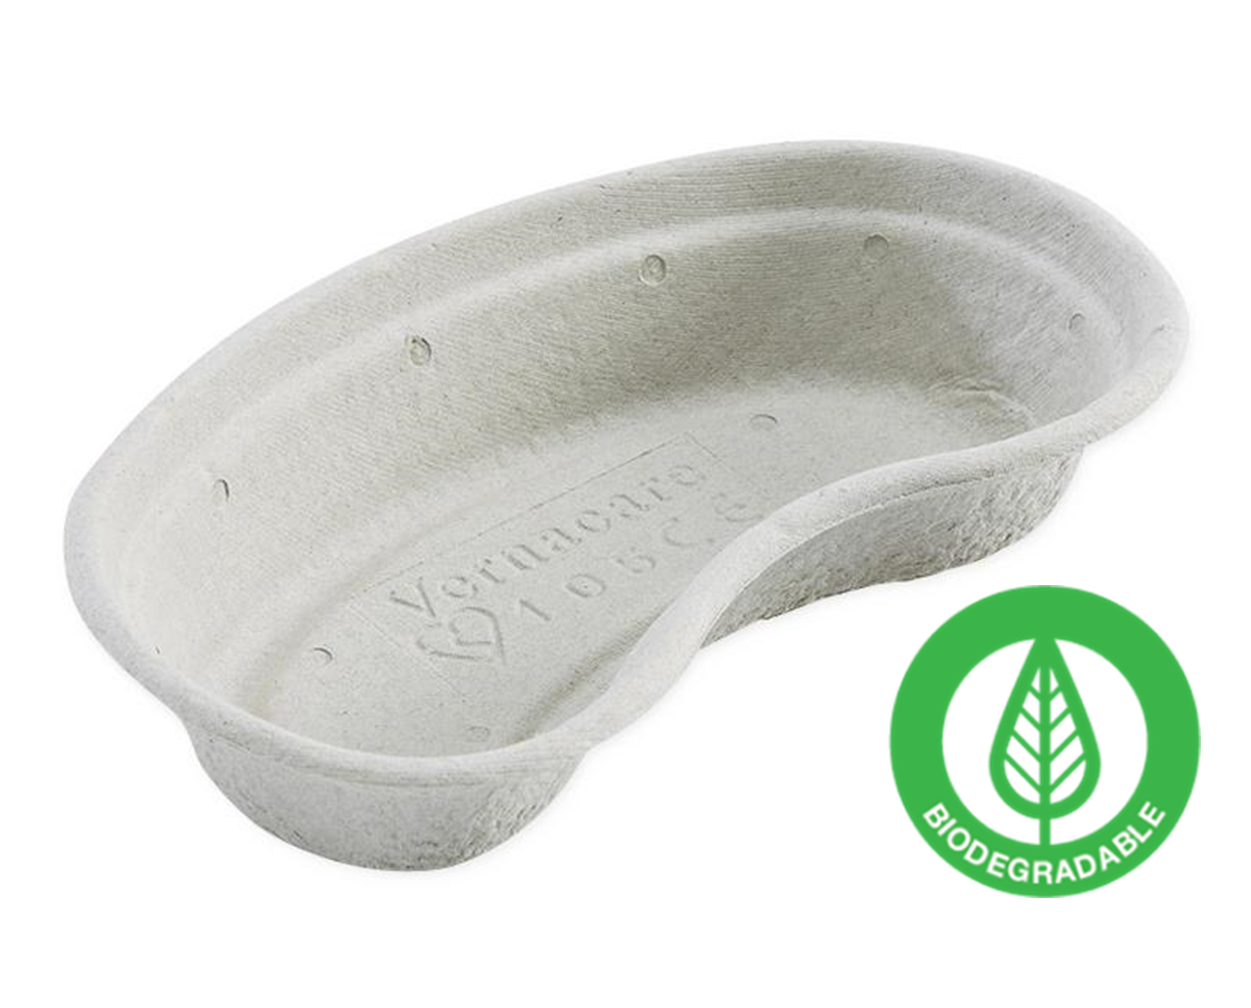 These single-use medical grade fiber kidney bowls are constructed with a biodegradable pulp fiber made from 100% recycled newsprint and ideal for handling 700ml of fluid.